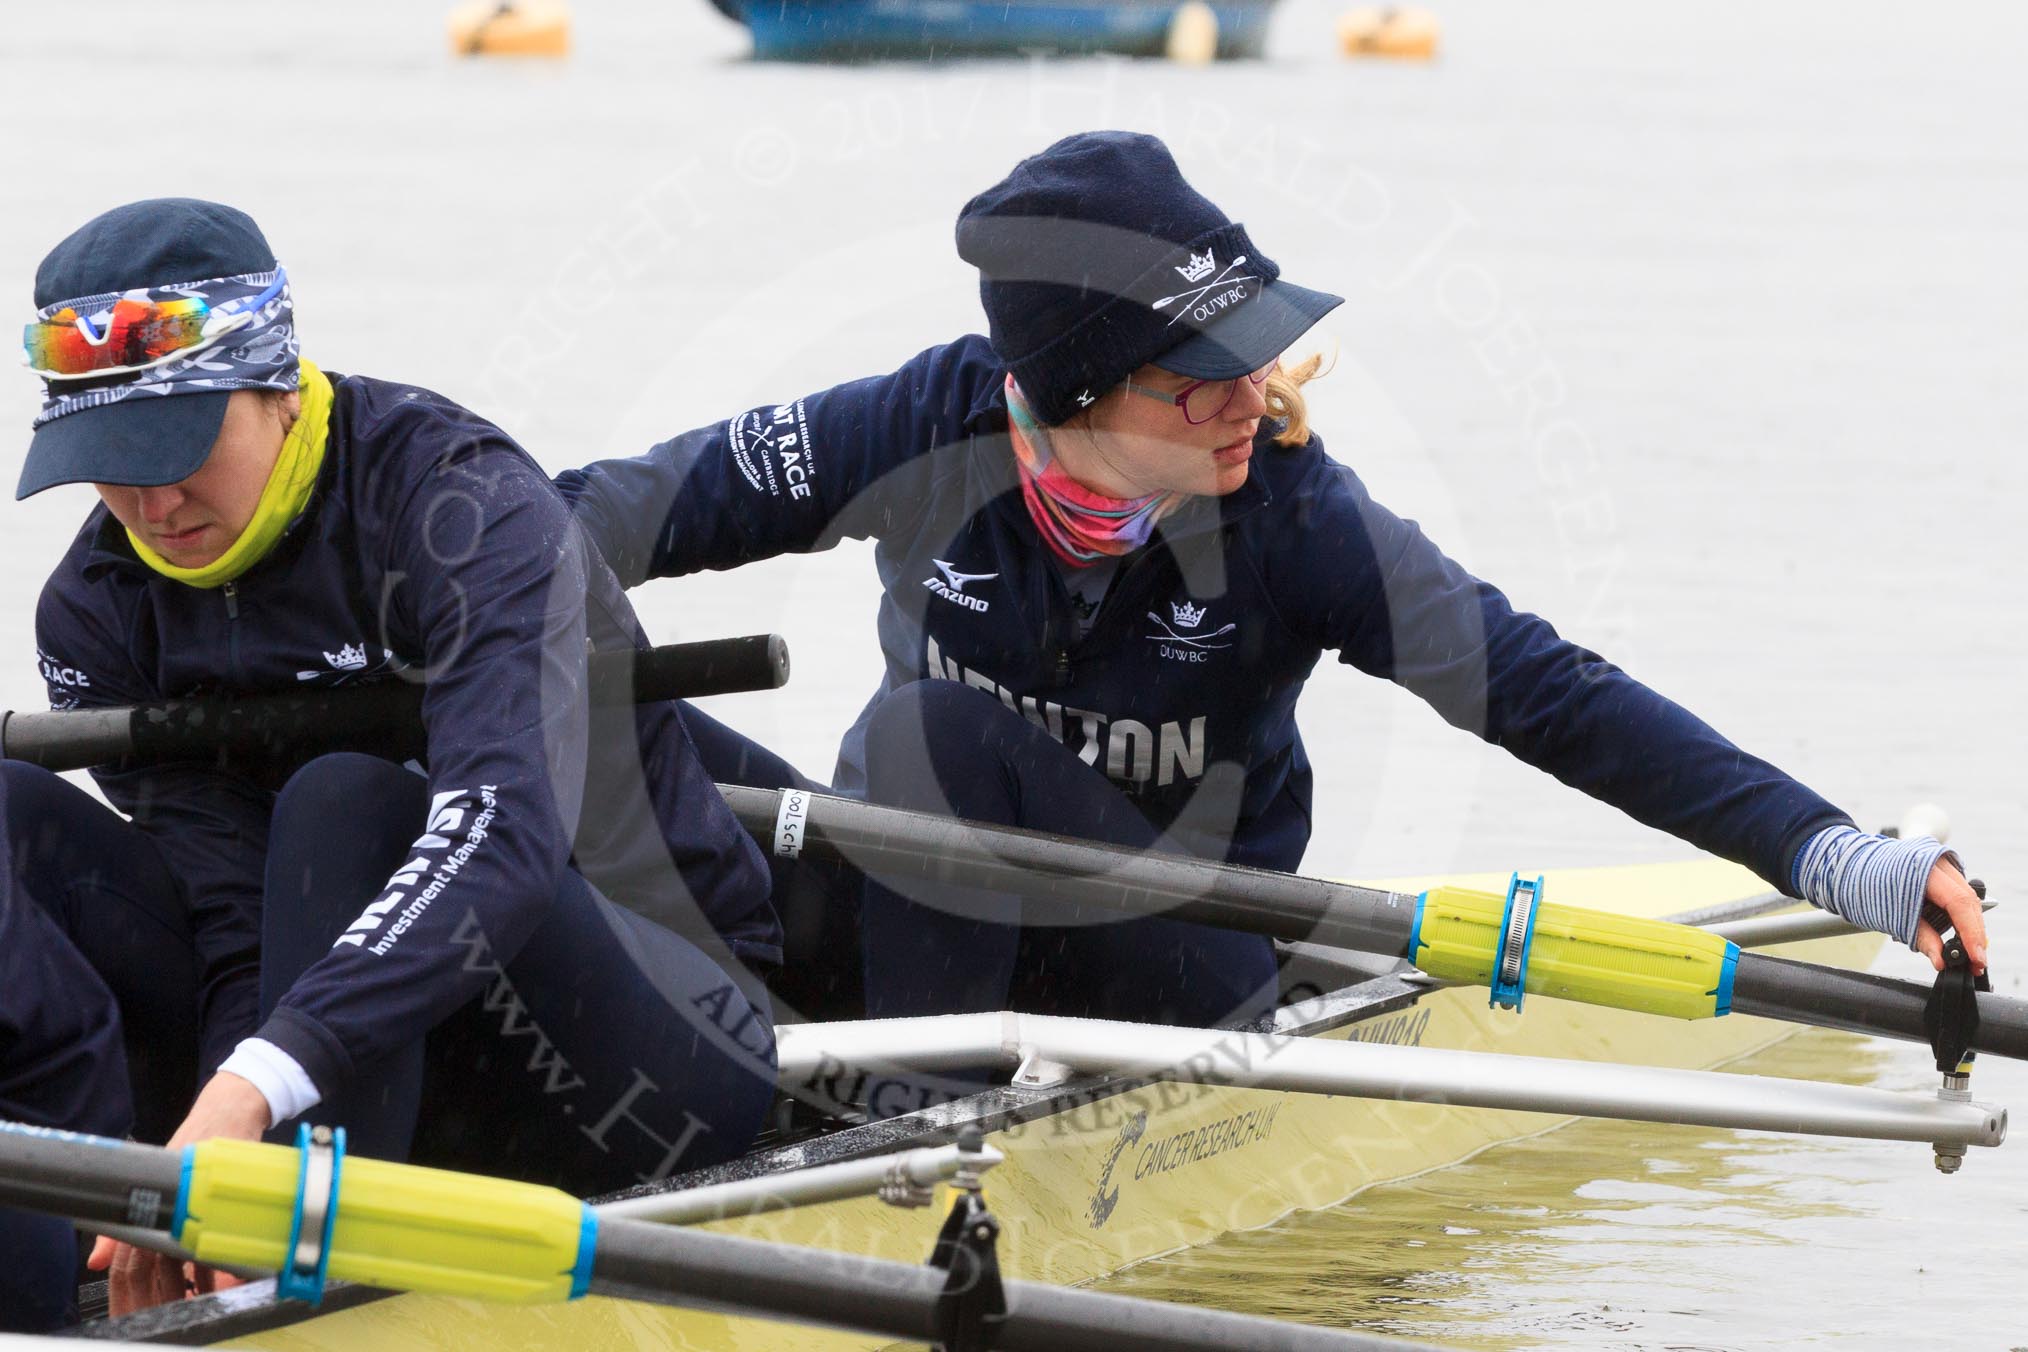 The Women's Boat Race season 2018 - fixture OUWBC vs. Molesey BC: OUWBC getting the boat ready on a cold and rainy day, here 2 seat Katherine Erickson and bow Renée Koolschijn.
River Thames between Putney Bridge and Mortlake,
London SW15,

United Kingdom,
on 04 March 2018 at 13:05, image #4